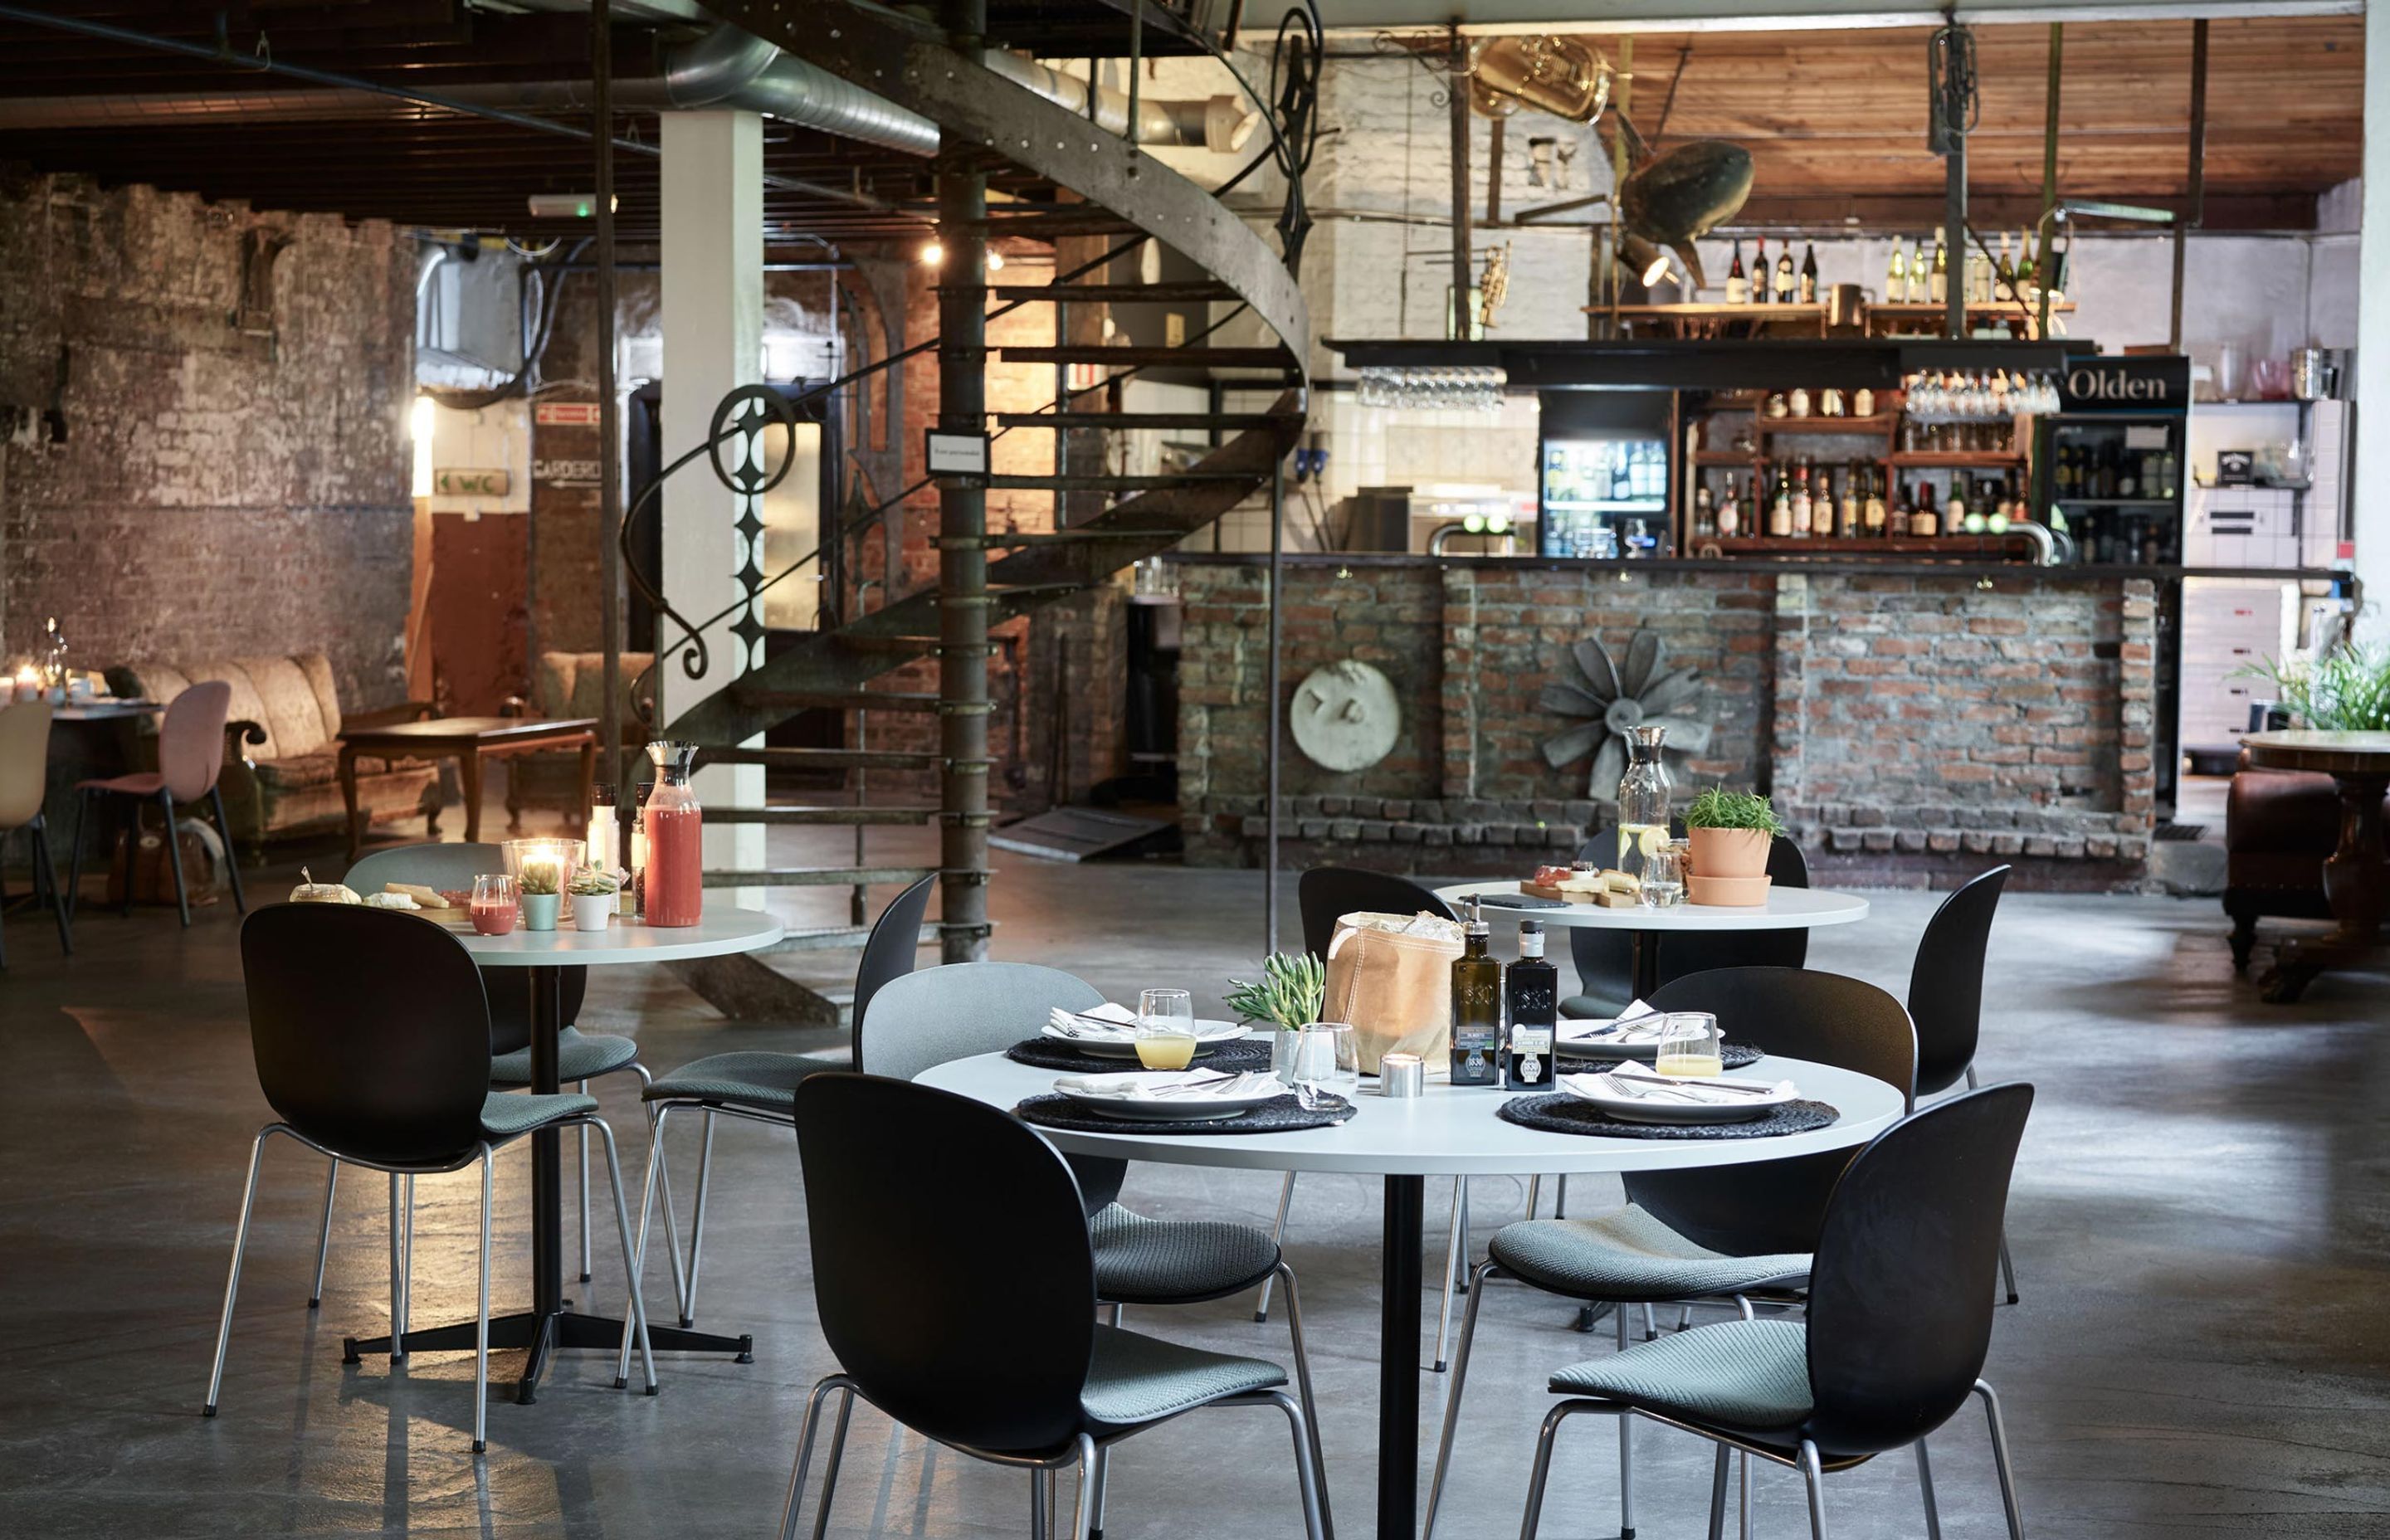 A rustic cafe scene, complete with bare brick walls and RBM Noor chairs